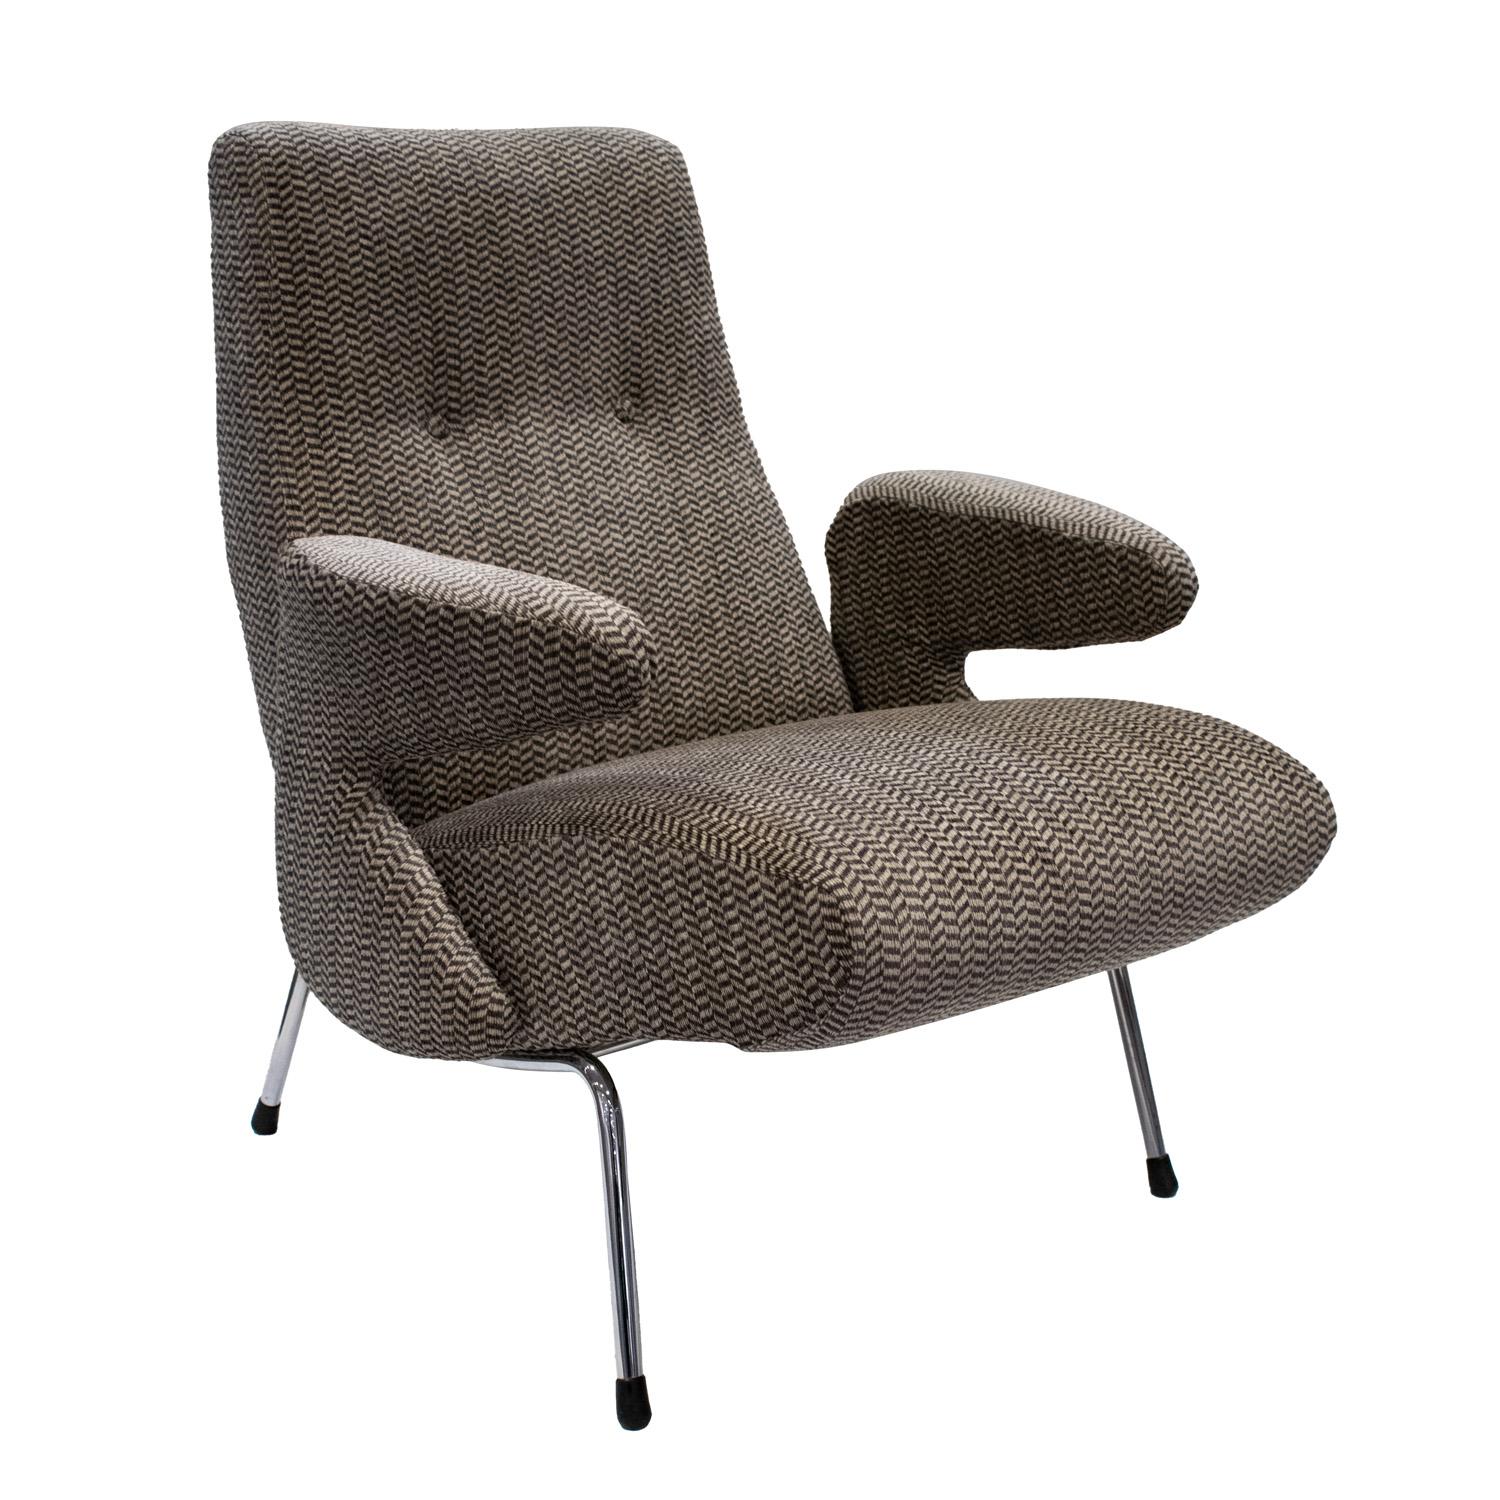 Sculptural lounge chair with chrome base and upholstered seat, back and arms, Italian 1960's.  This chair has been newly reupholstered by Lobel Modern in a beautiful fabric.  It is extremely comfortable.